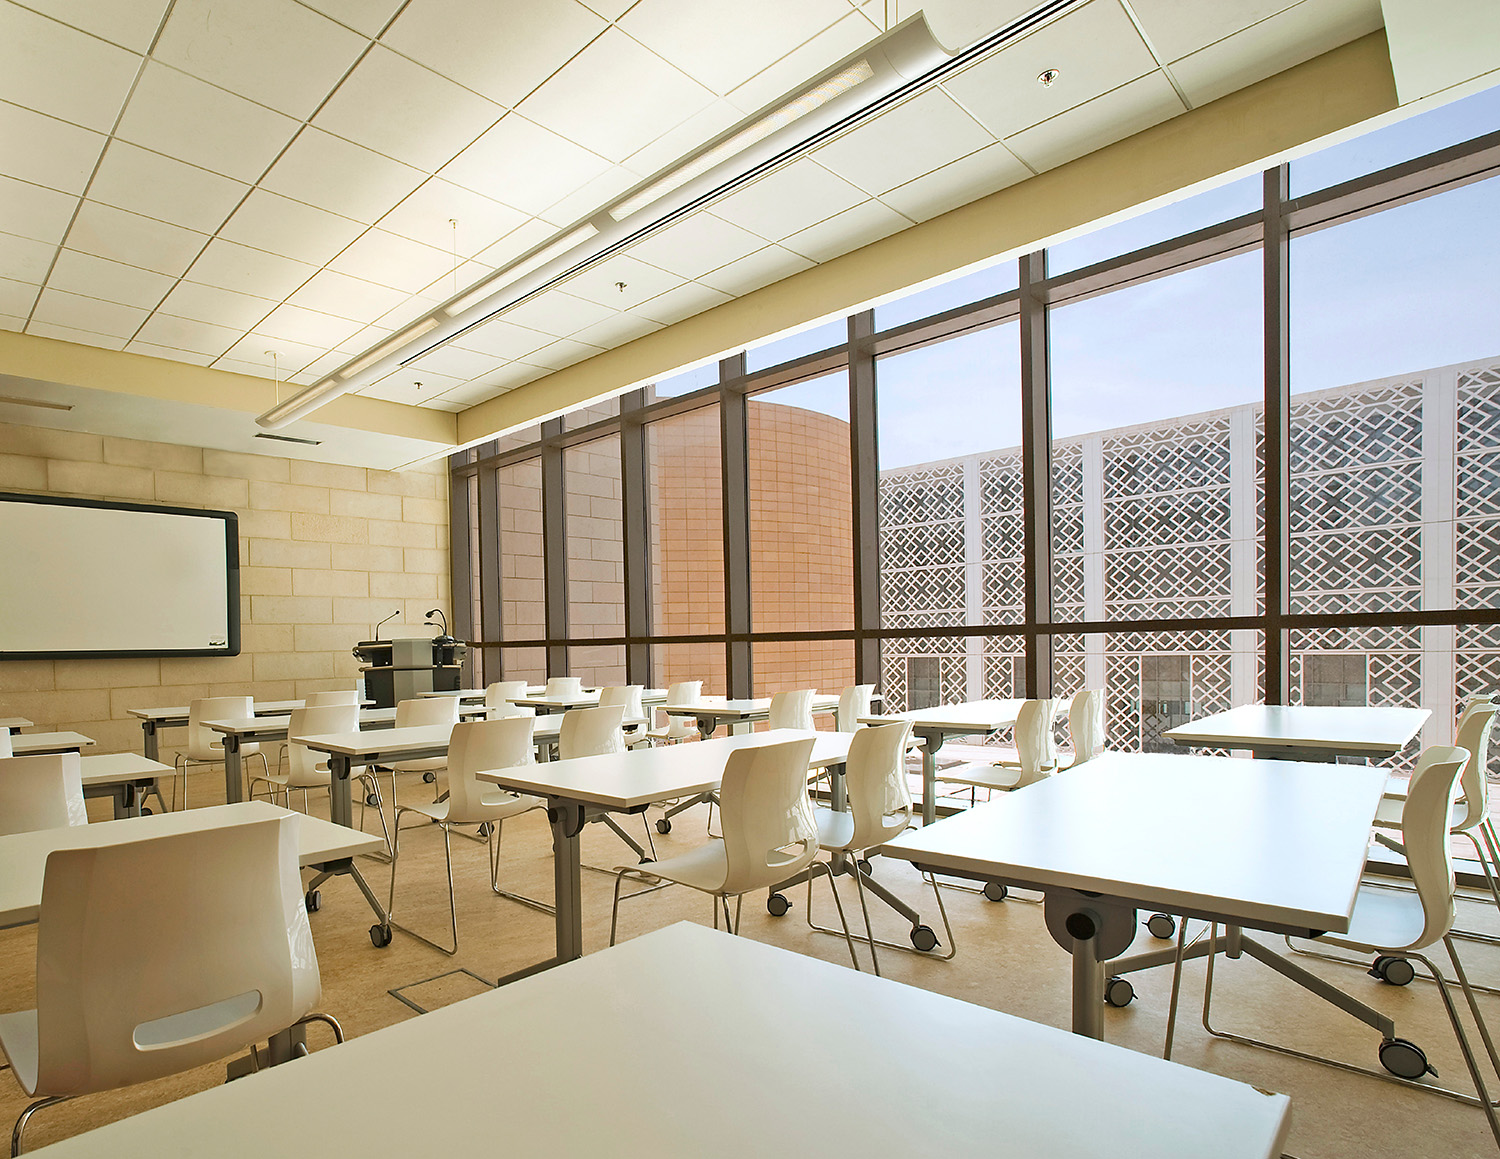 A seminar room at the College of Arts, Humanities and Sciences overlooking a student life courtyard  